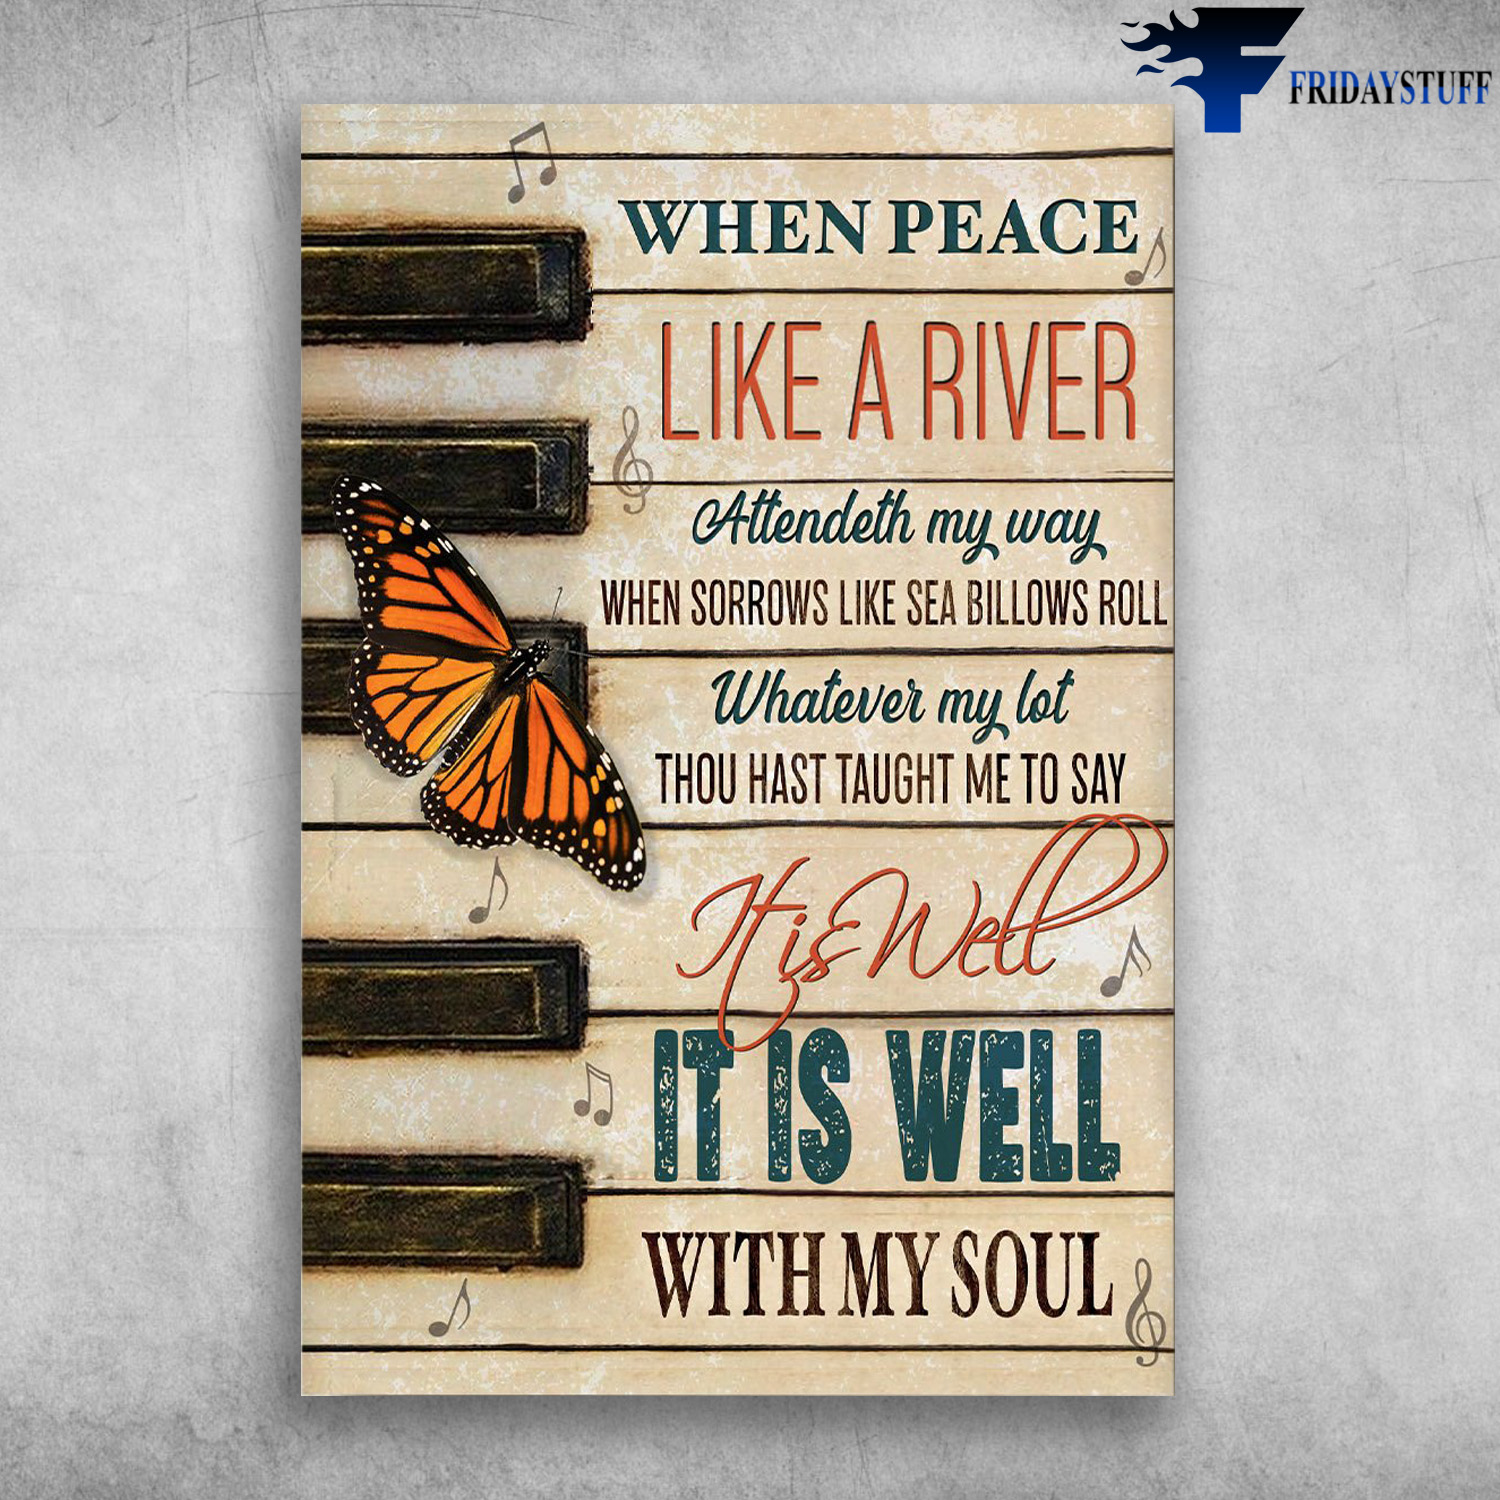 Butterfly And Piano - When Peace, Like A River, Attendeth My Way, When Sorrows Like Sea Billows Roll, Whatever My Lot, Thou Hast Taught Me To Say, It Is Well, It Is Well With My Soul